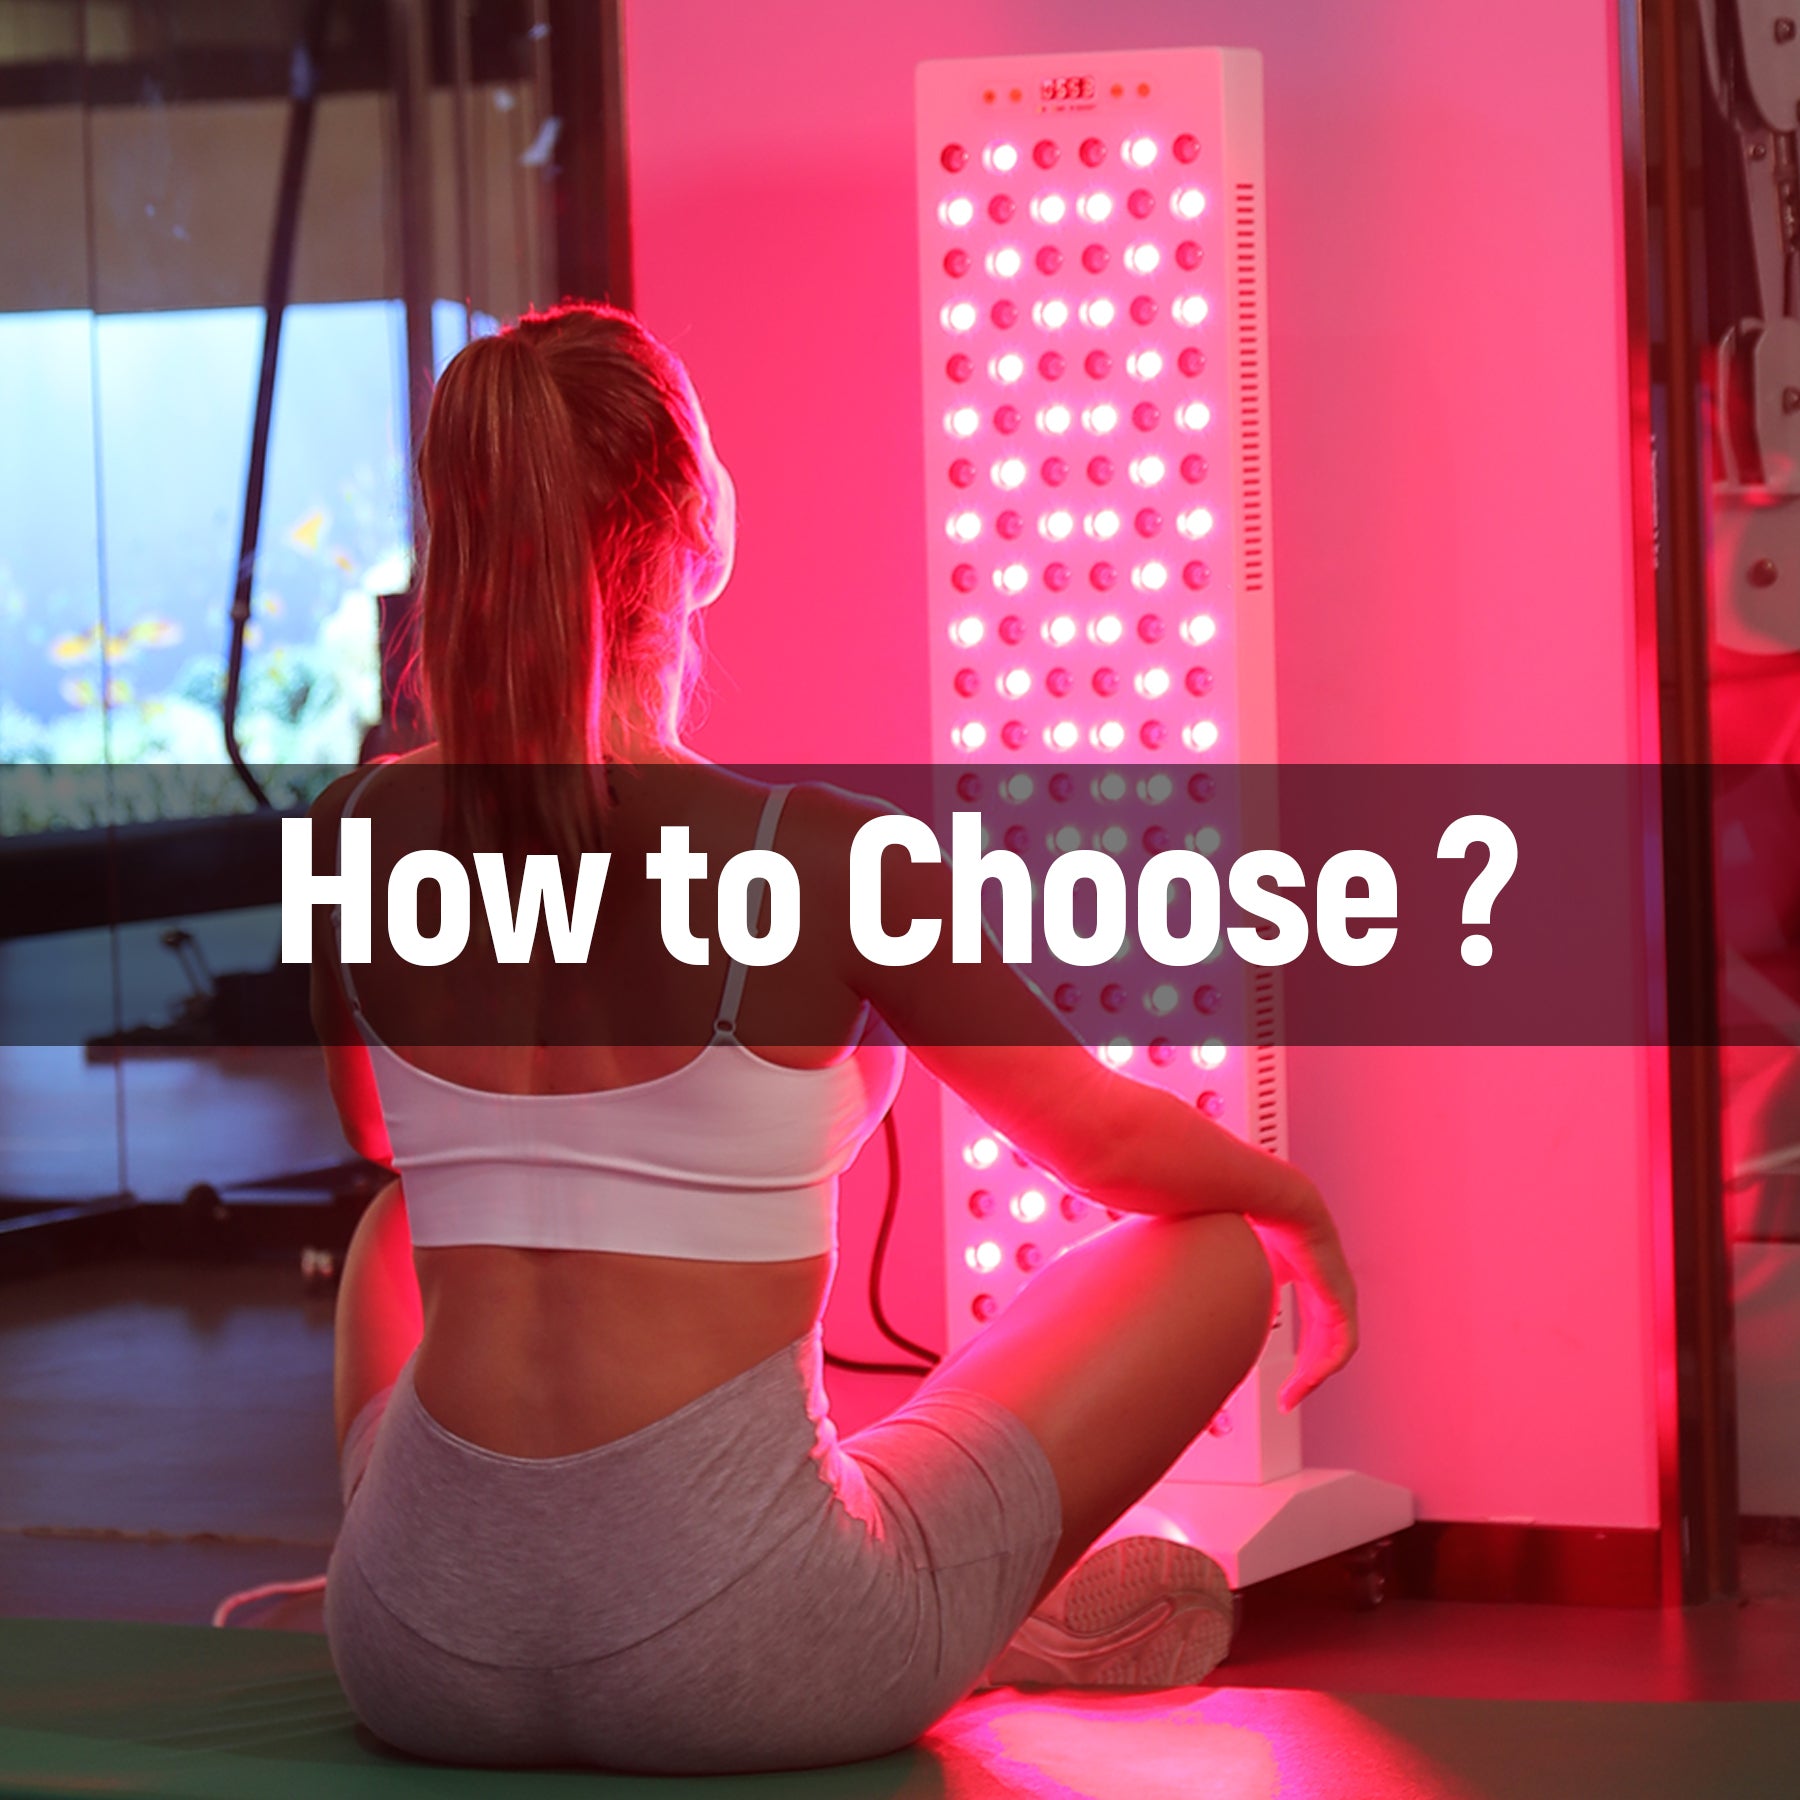 5 Factors to Consider When Choosing a Red Light Therapy Device